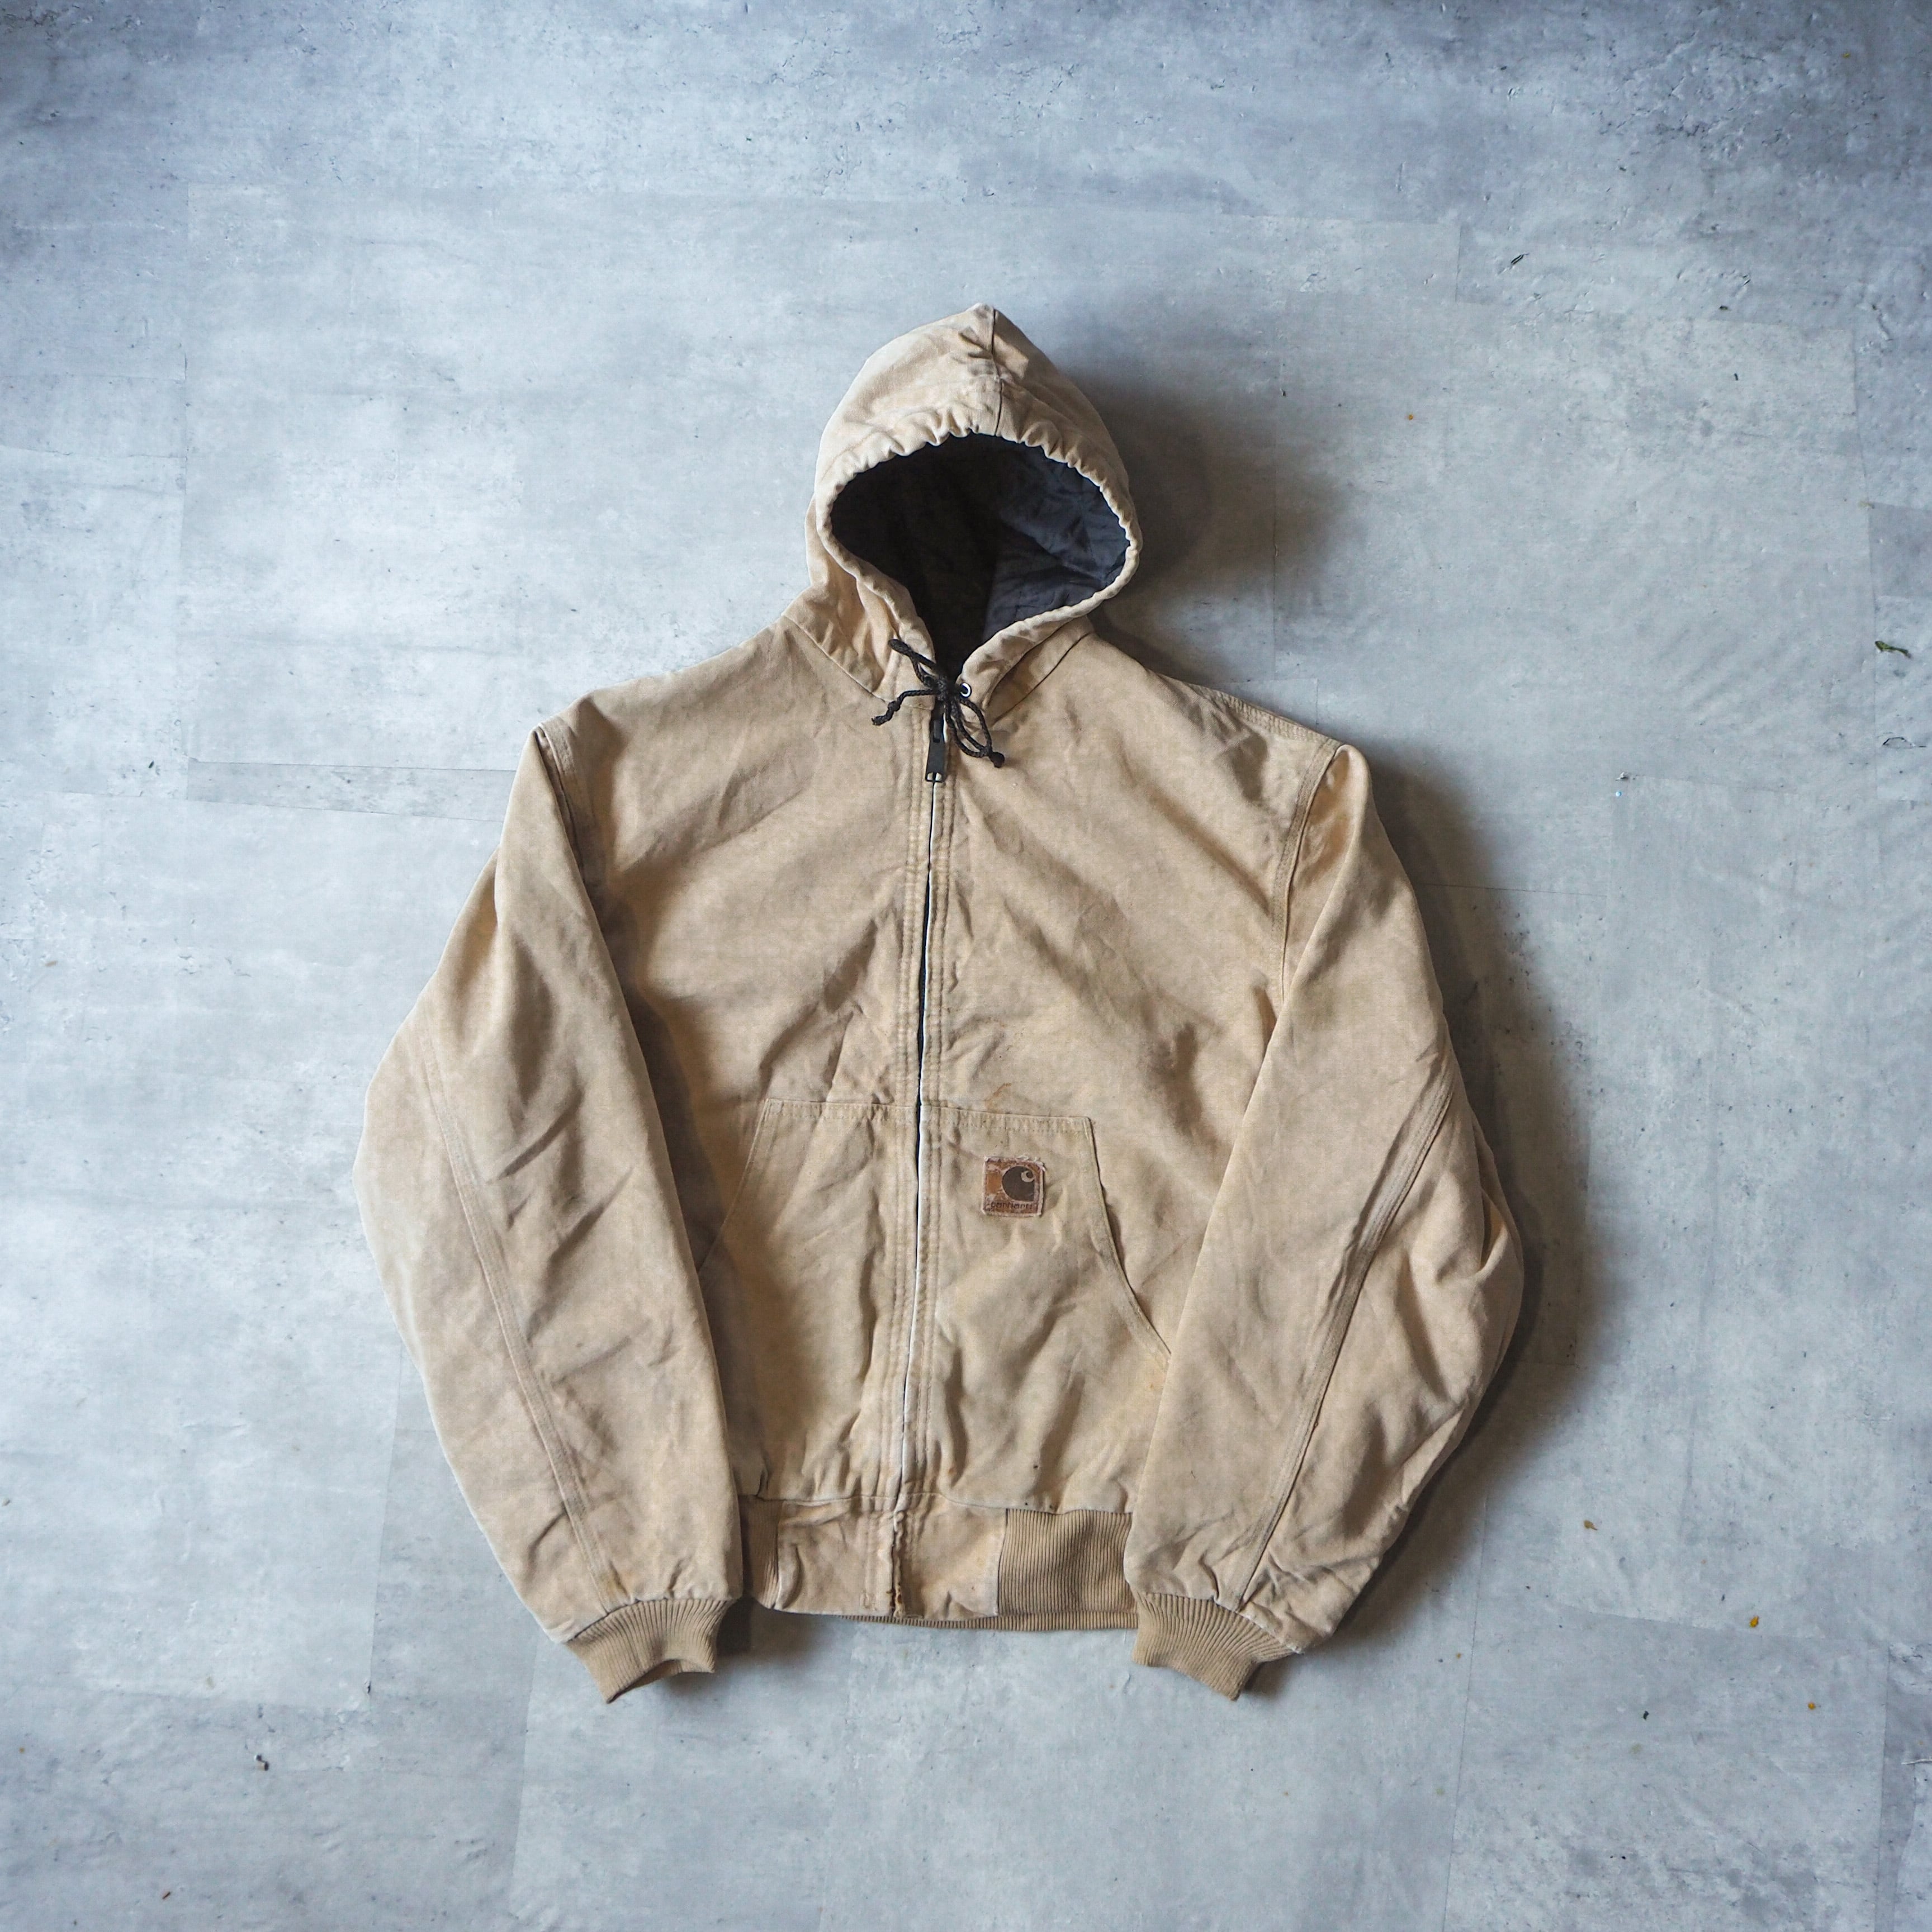 80s-90s “carhartt” crafted with pride in the USAタグ beige color active  jacket L 90年代 カーハート アクティブジャケット キャメル ベージュ usa製 made in USA ジップパーカー anti  knovum（アンタイノーム）